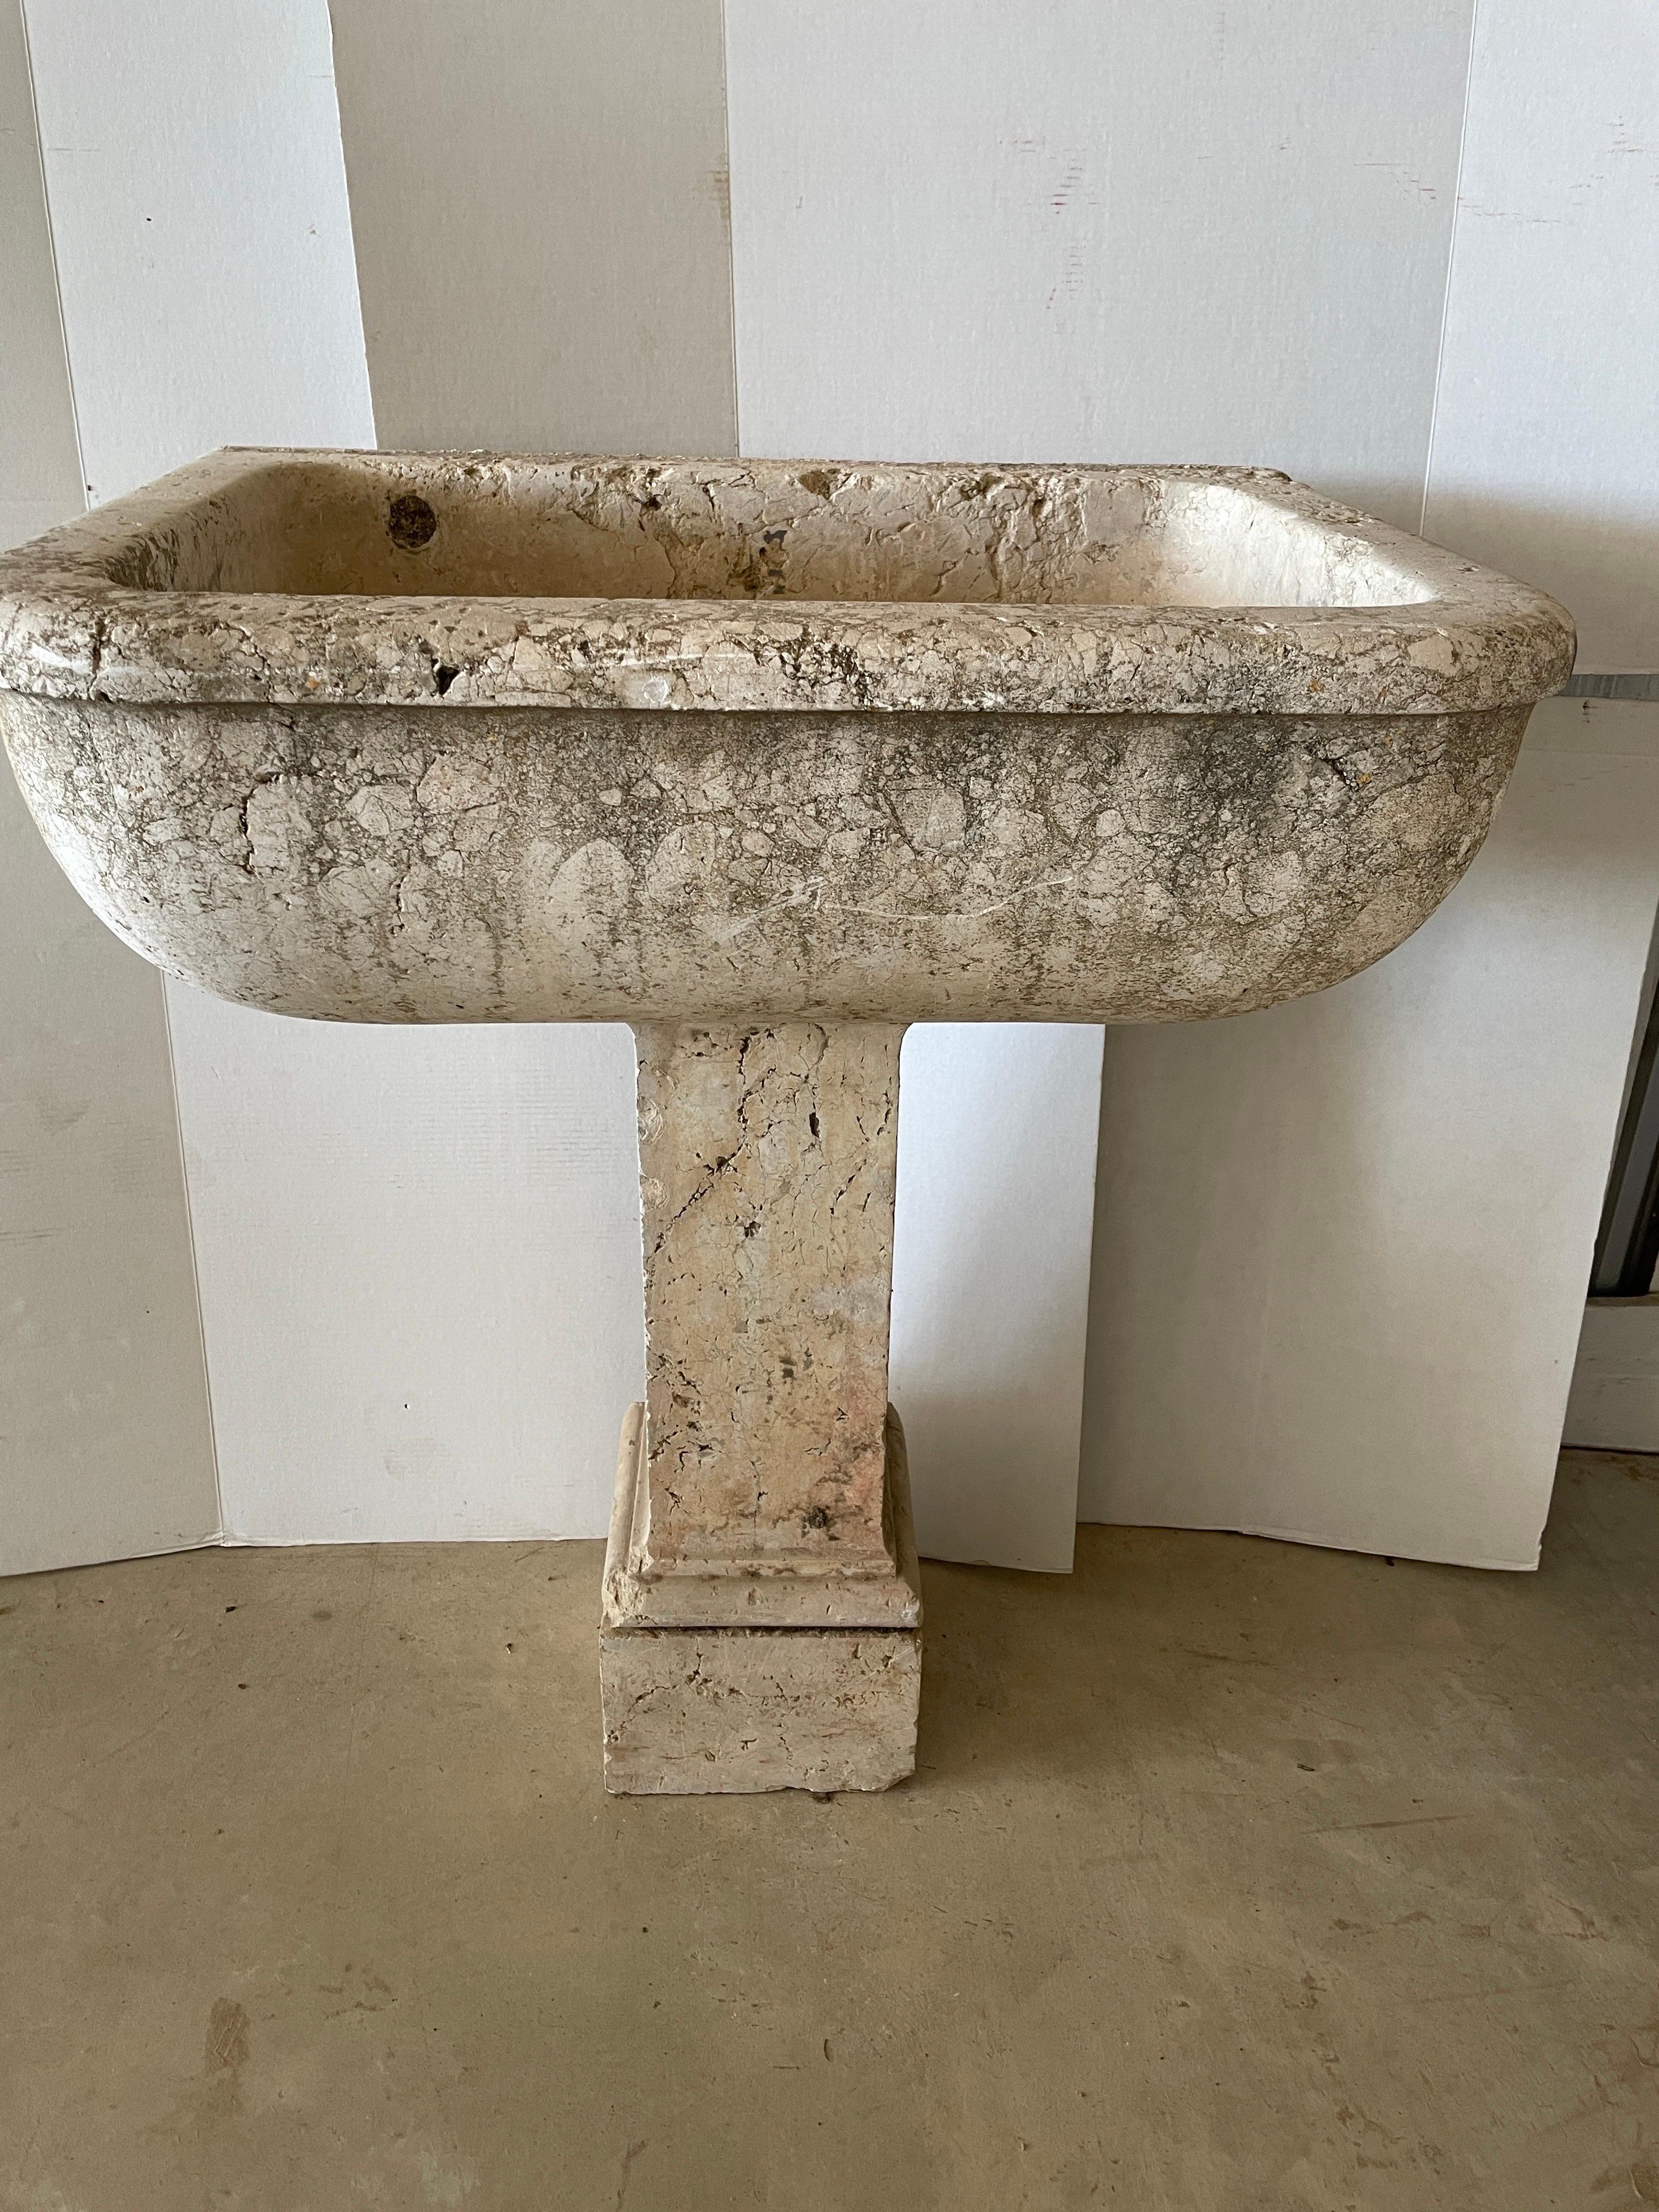 This is a large scale Spanish 18th century fountain sink from the Tarragona region of Spain. The cream and light pink veins in this marble is typical from that area. It's great outdoors or inside for a sink in a large powder room or anywhere one is